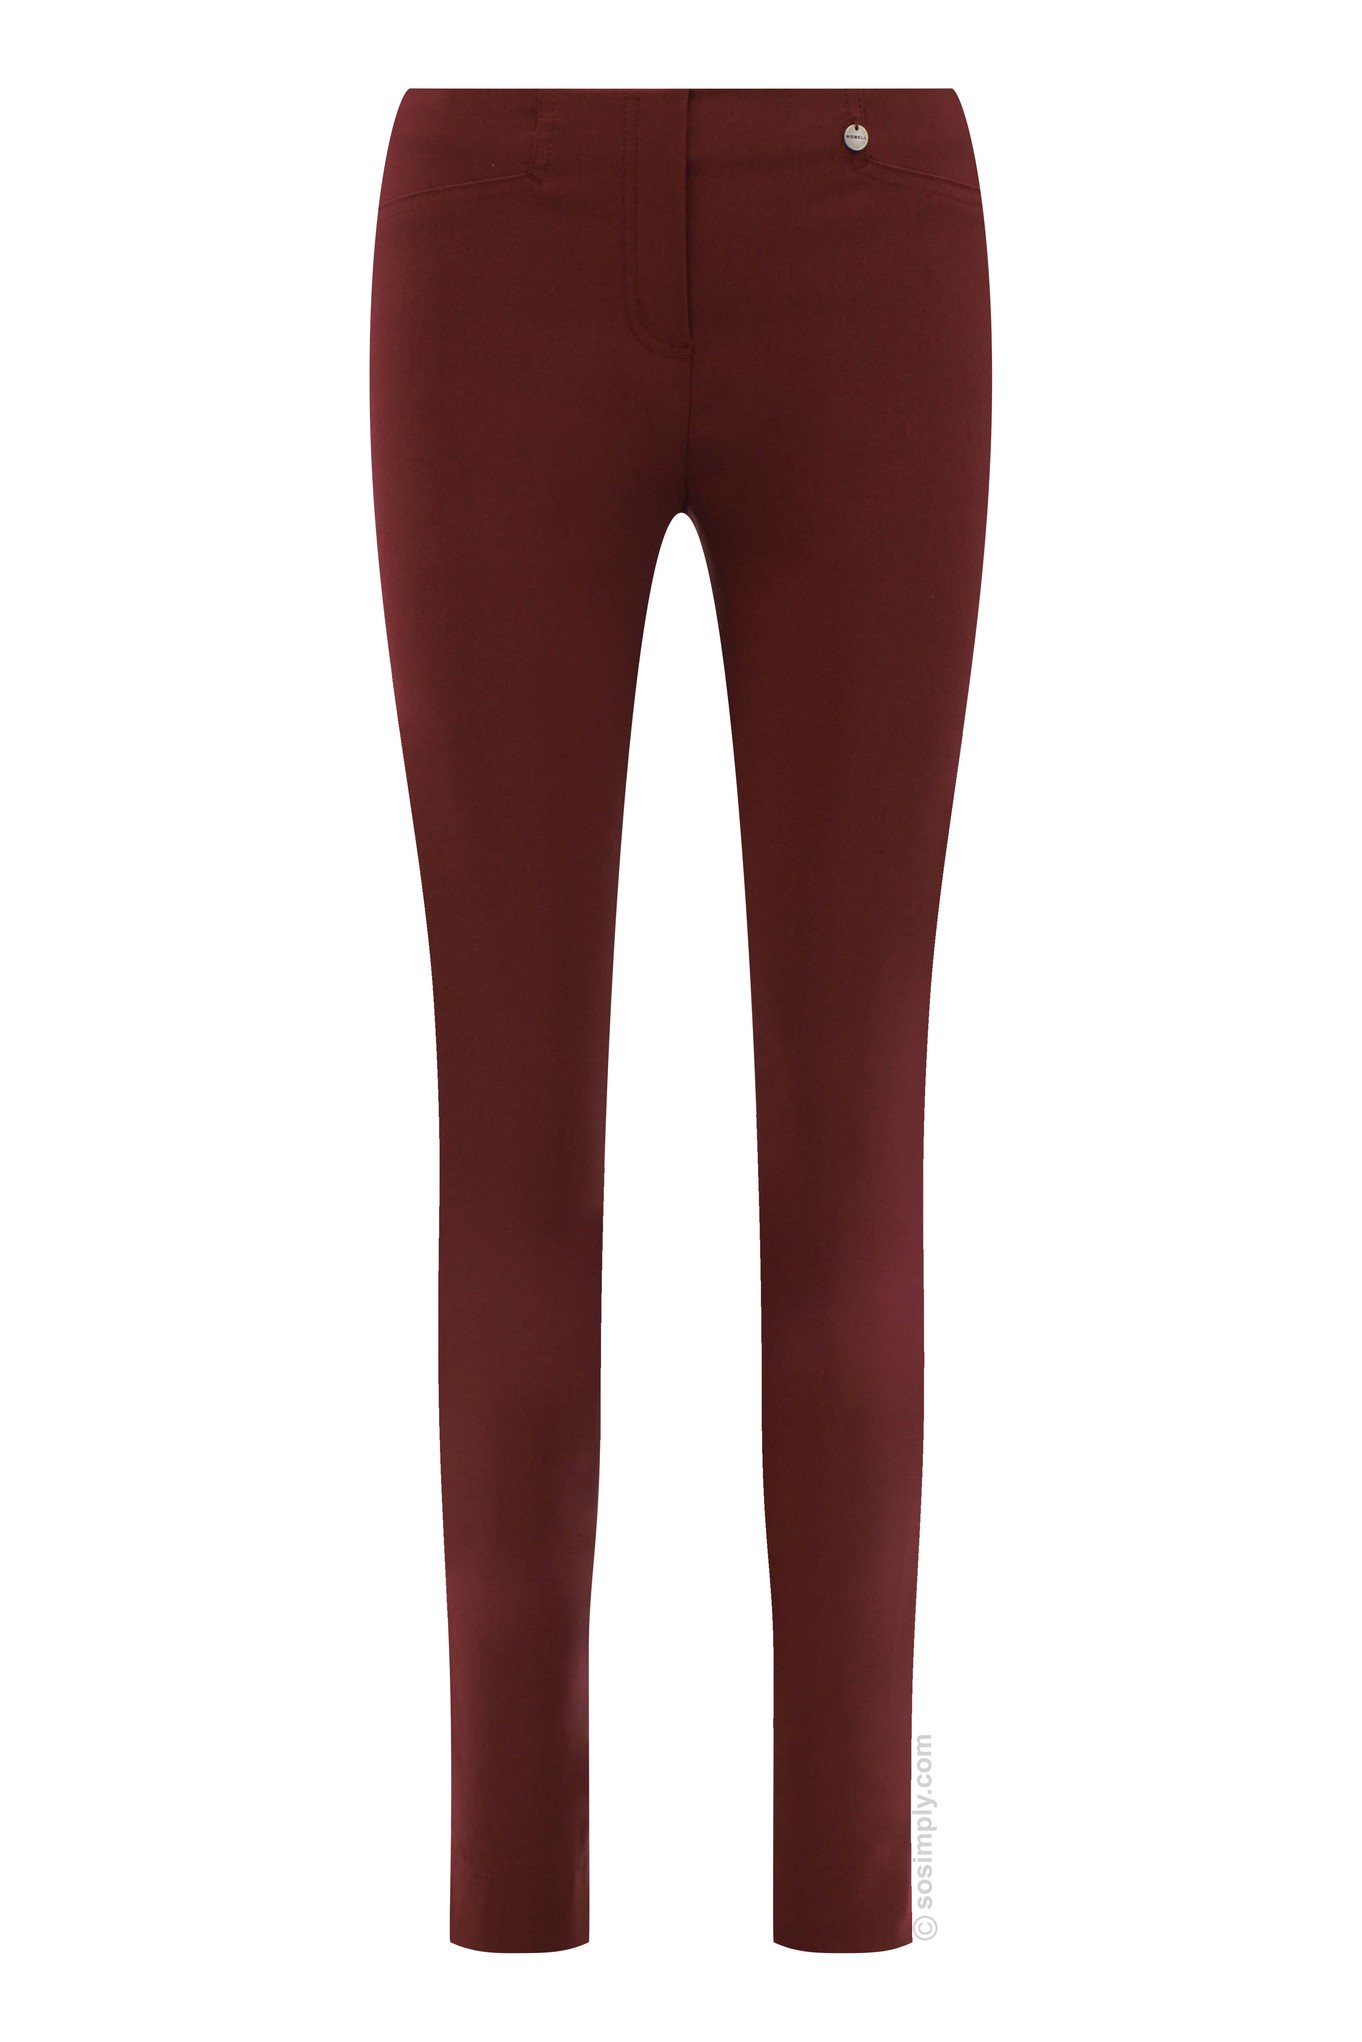 Robell Rose Stretch Faux Suede Trouser - So Simply Robell